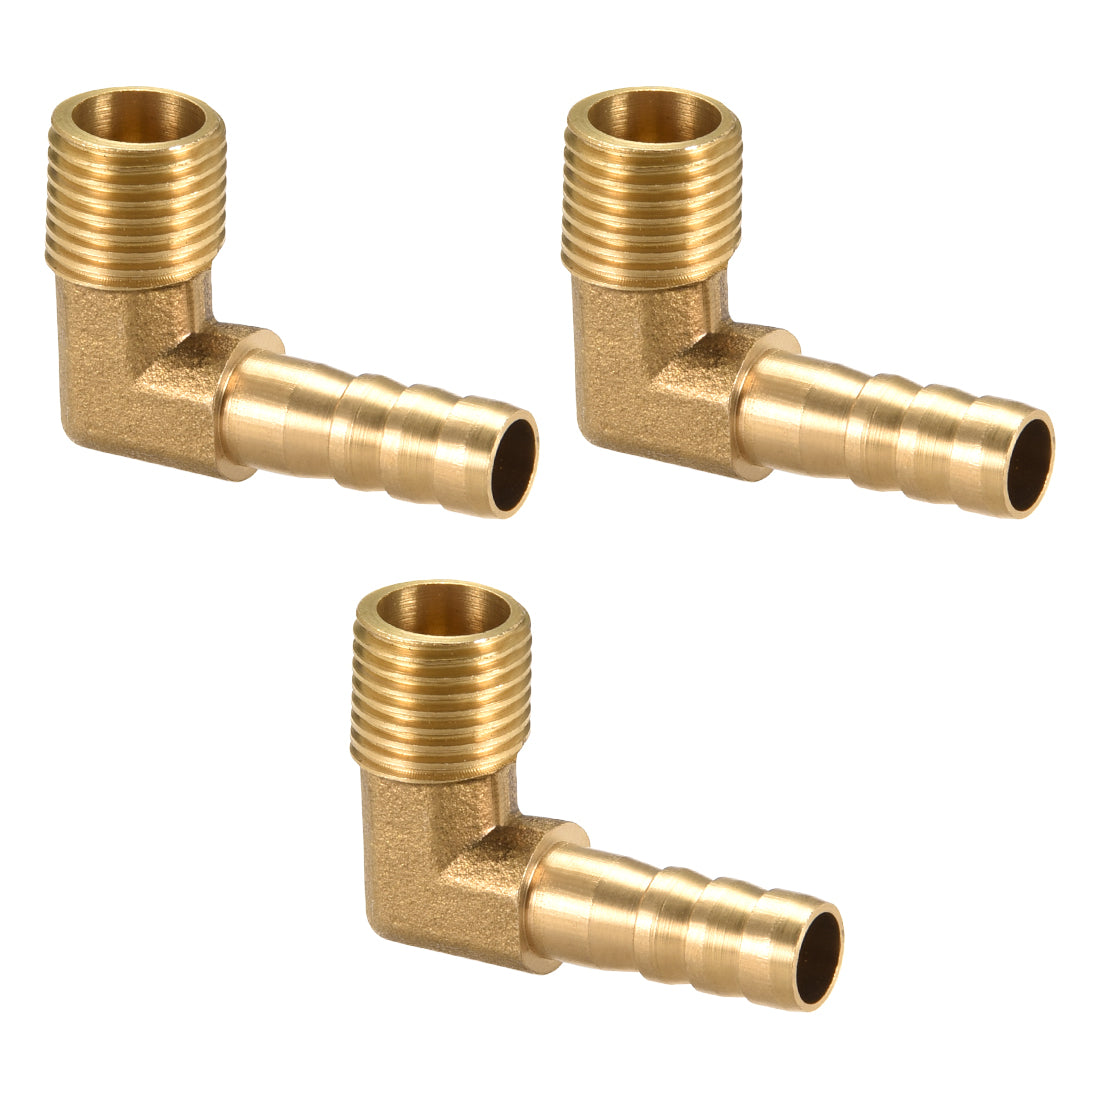 Uxcell Uxcell Brass Barb Hose Fitting 90 Degree Elbow 12mm Barbed x 1/4 PT Male Pipe 3pcs